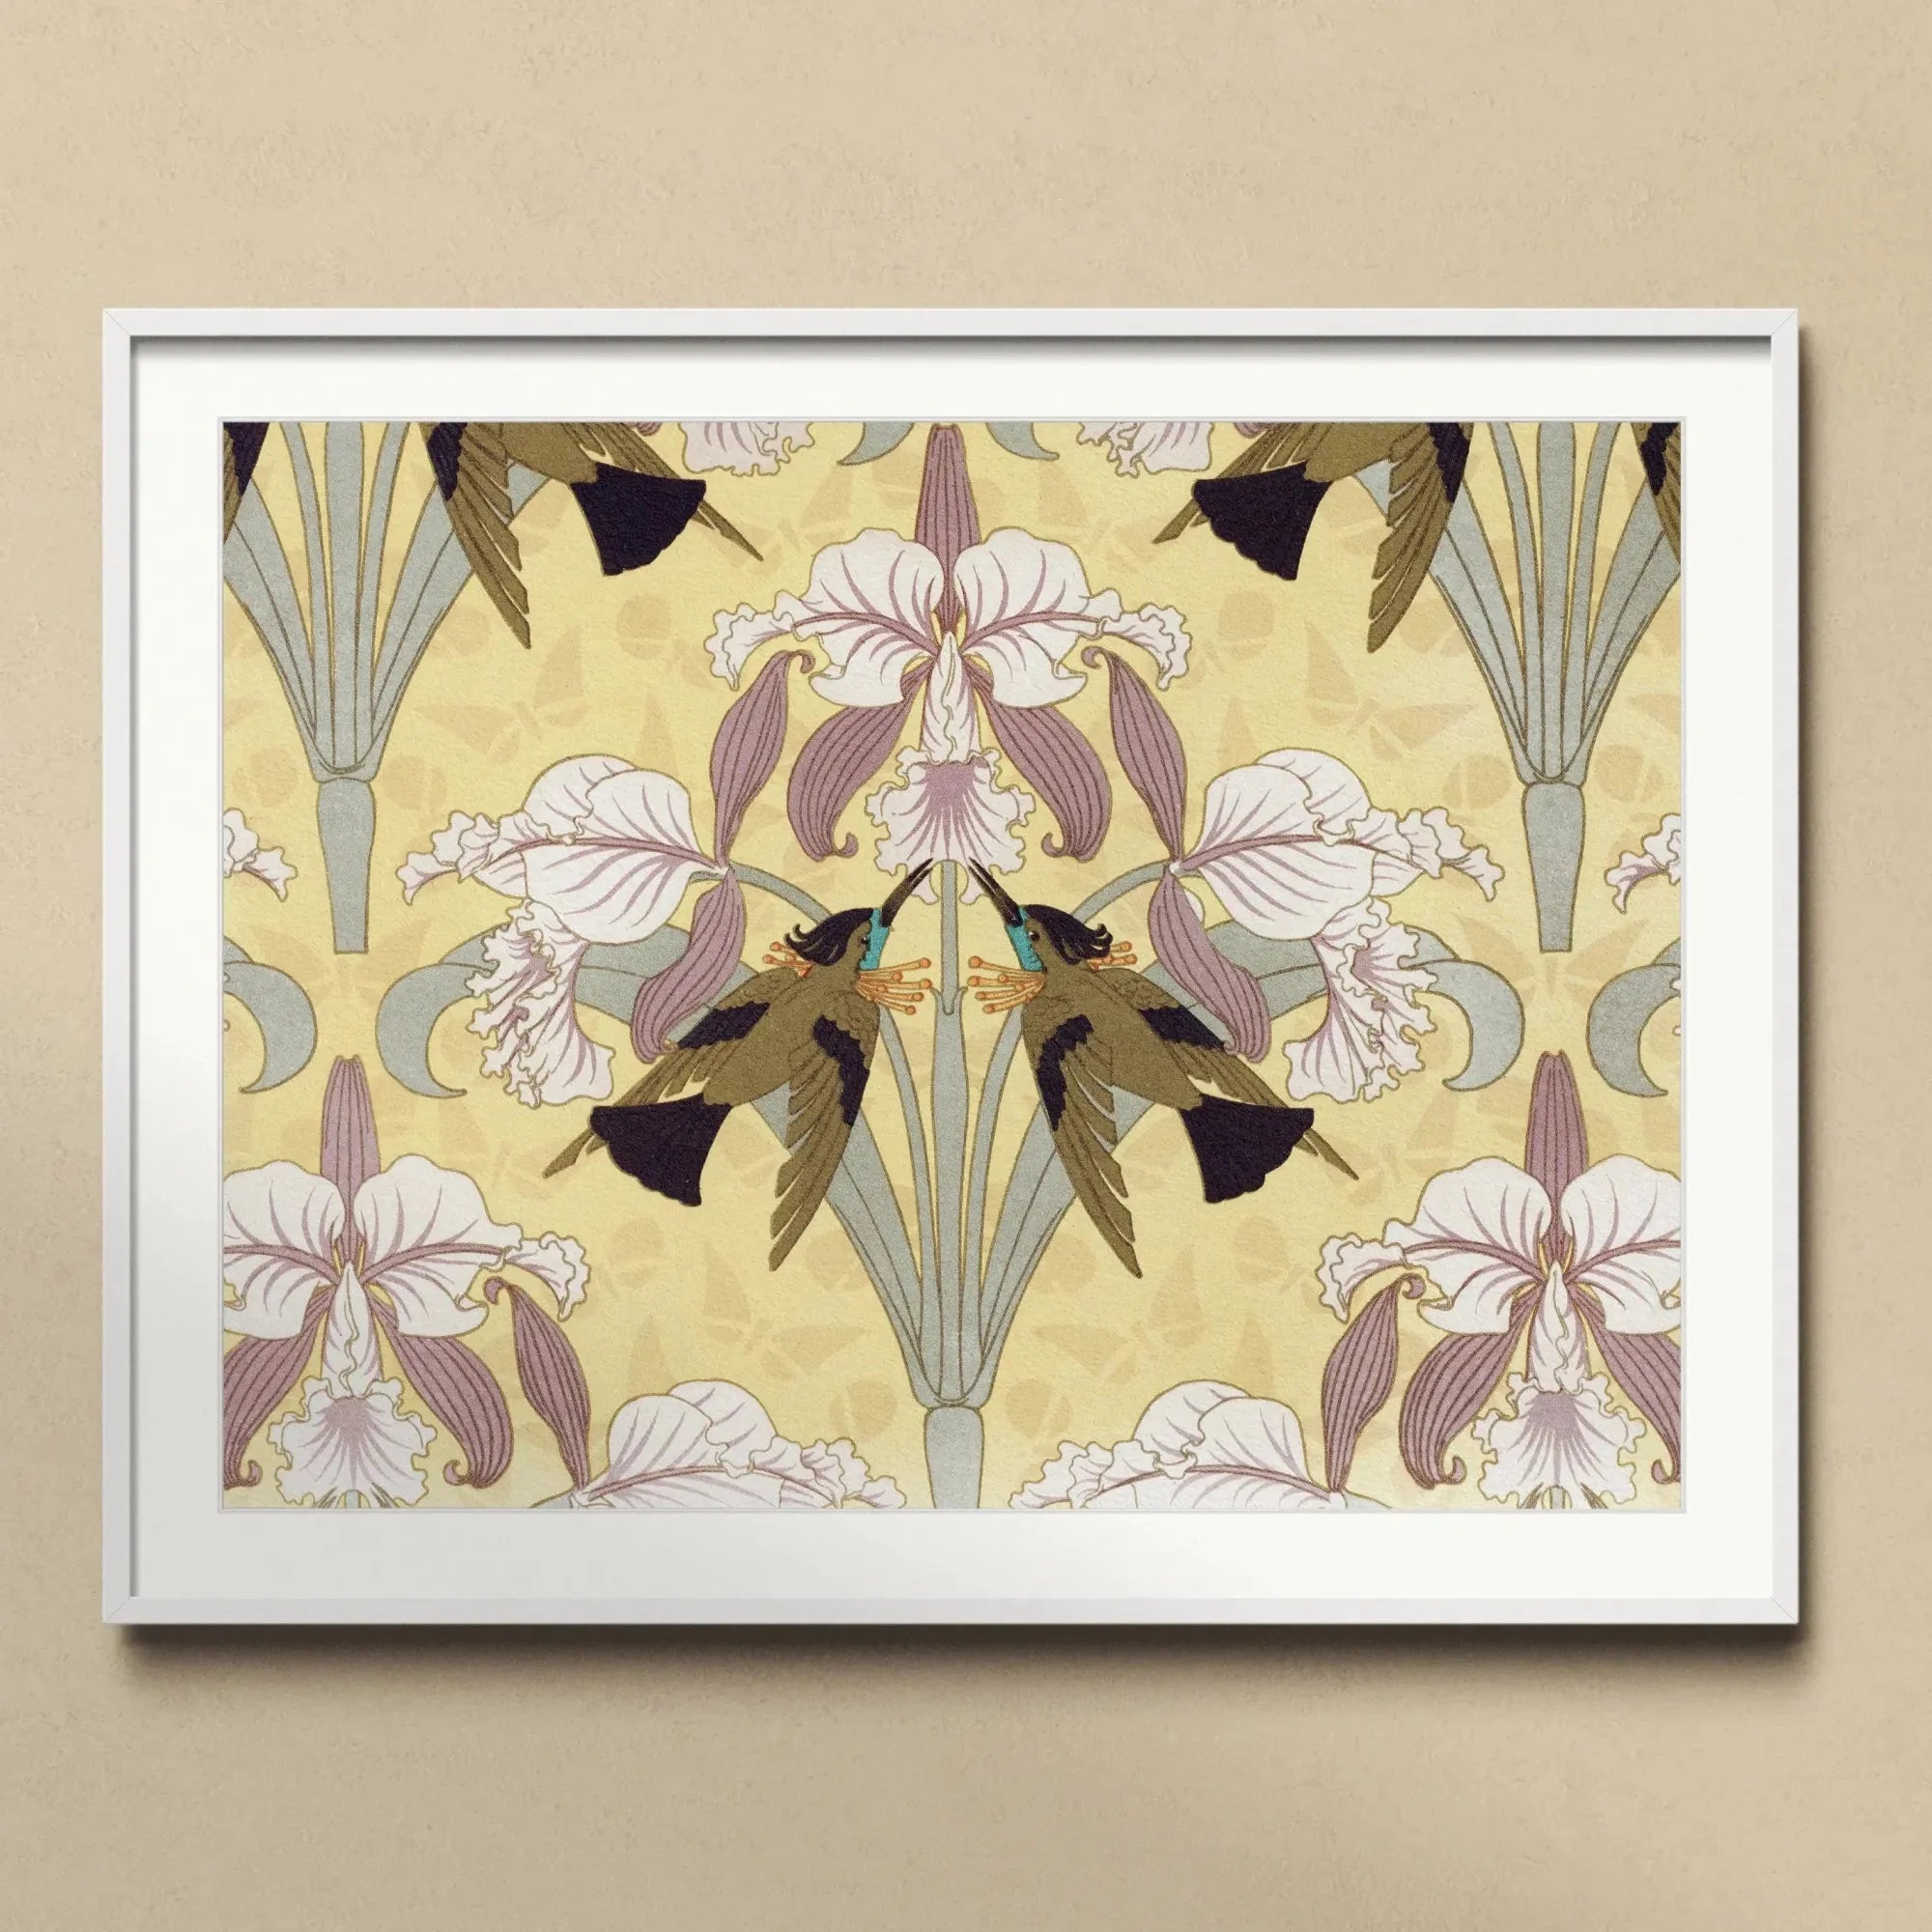 Oiseaux-mouches Et Orchidées By Maurice Pillard Verneuil Framed & Mounted Print - Posters Prints & Visual Artwork